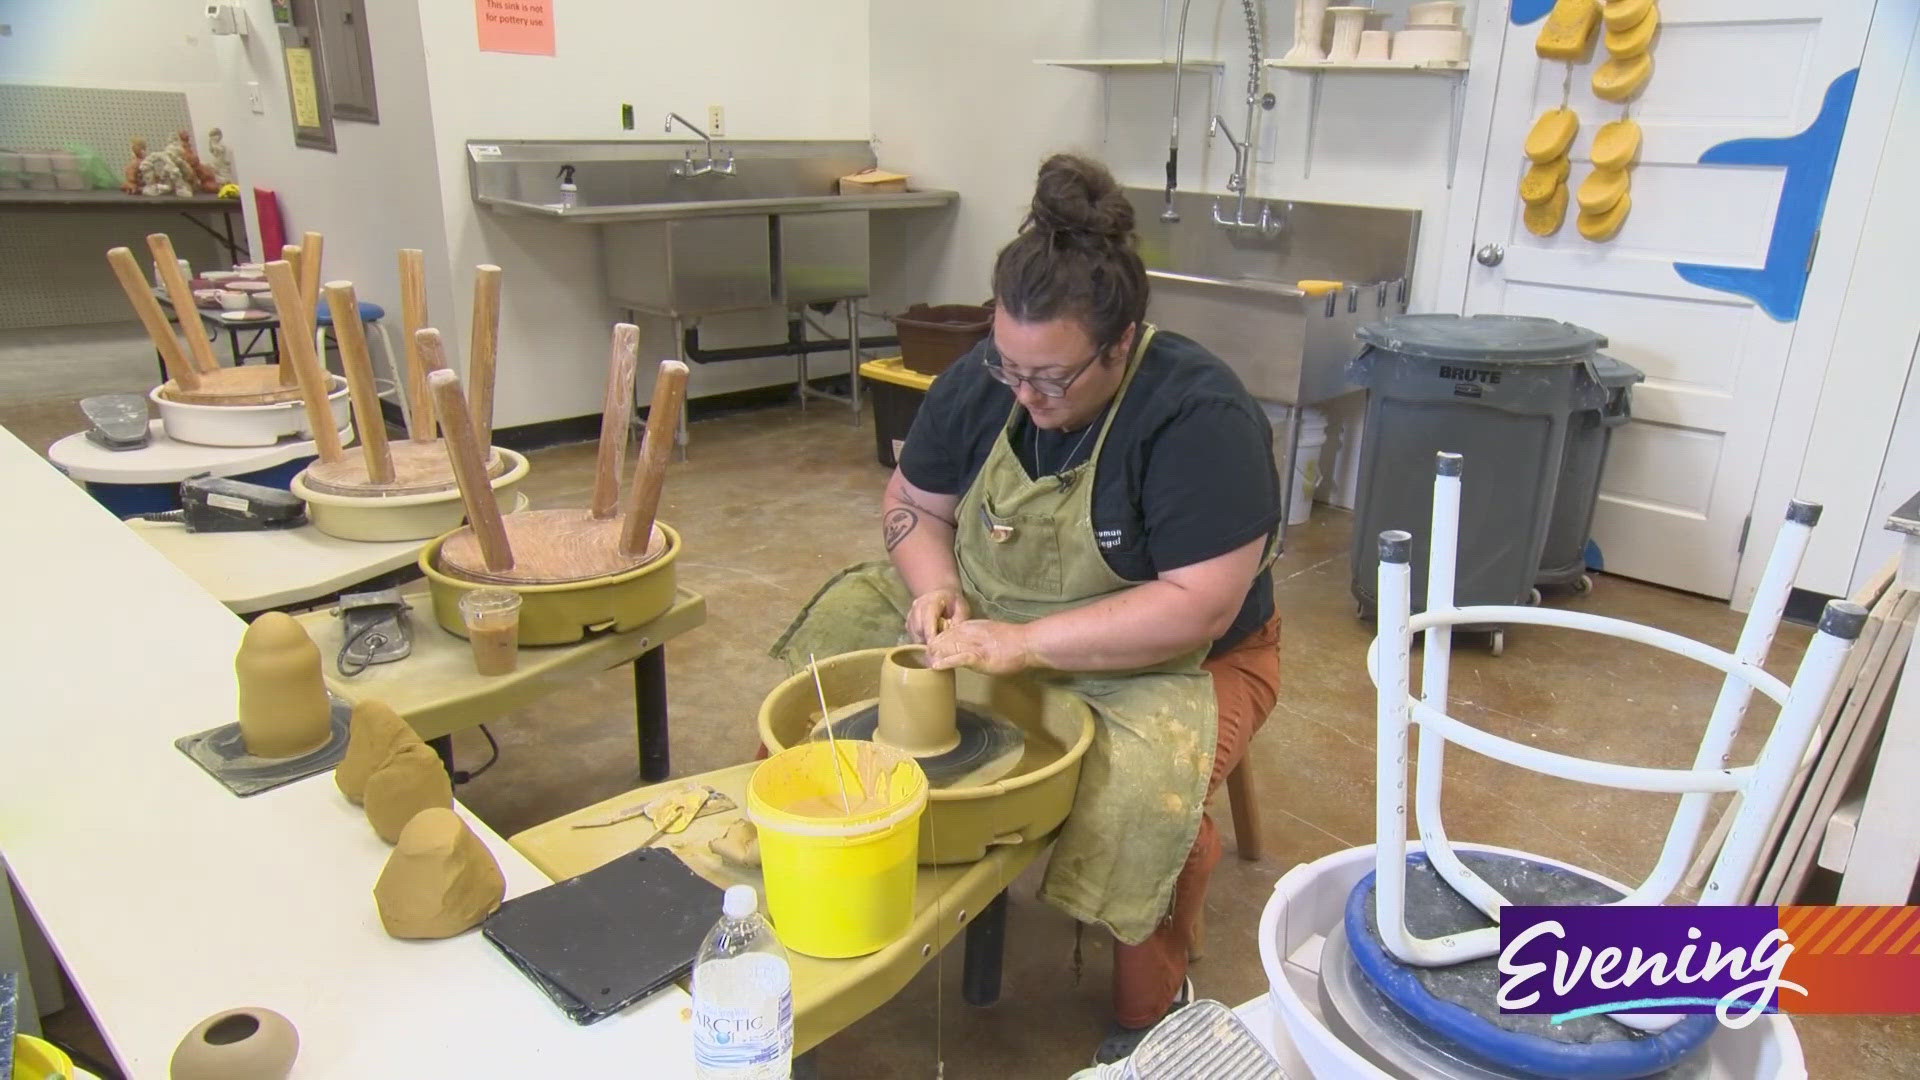 Arbutus Folk School has been keeping traditions alive for more than a decade. #k5evening